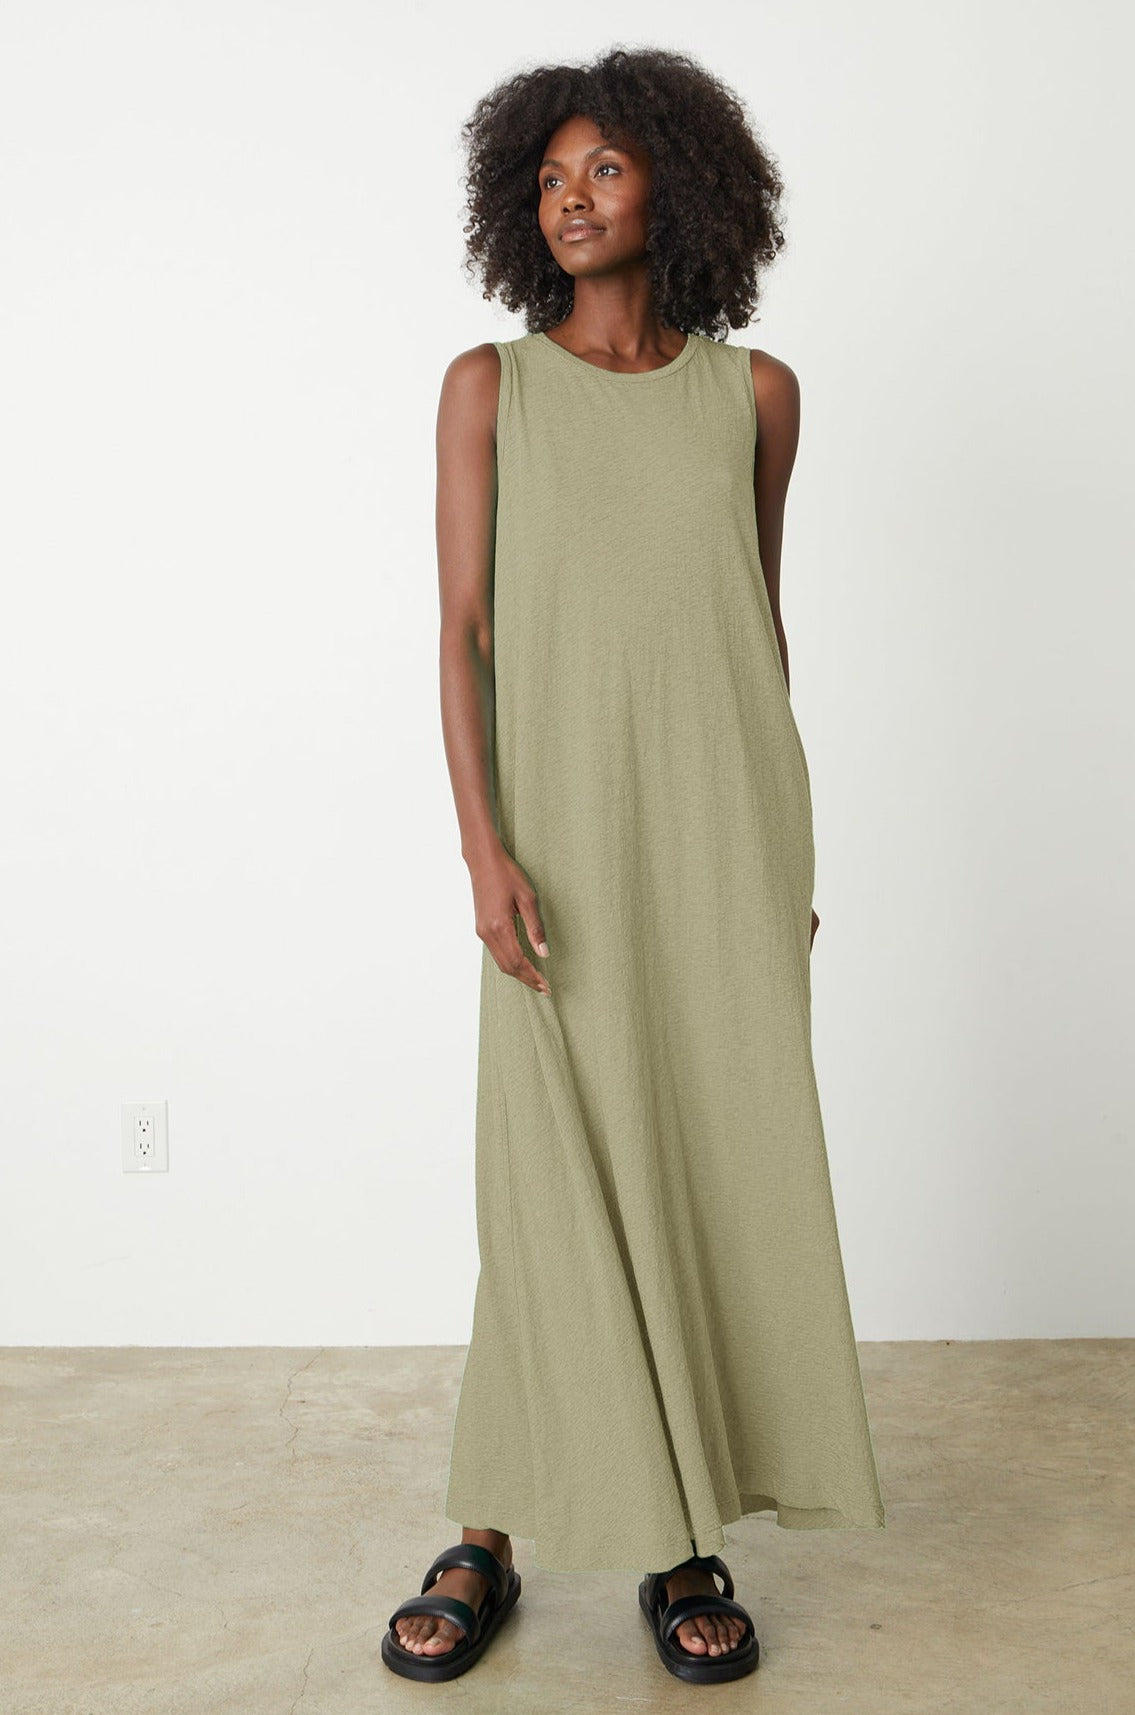 The EDITH sleeveless maxi dress in sage green by Velvet by Graham & Spencer.-26342821888193